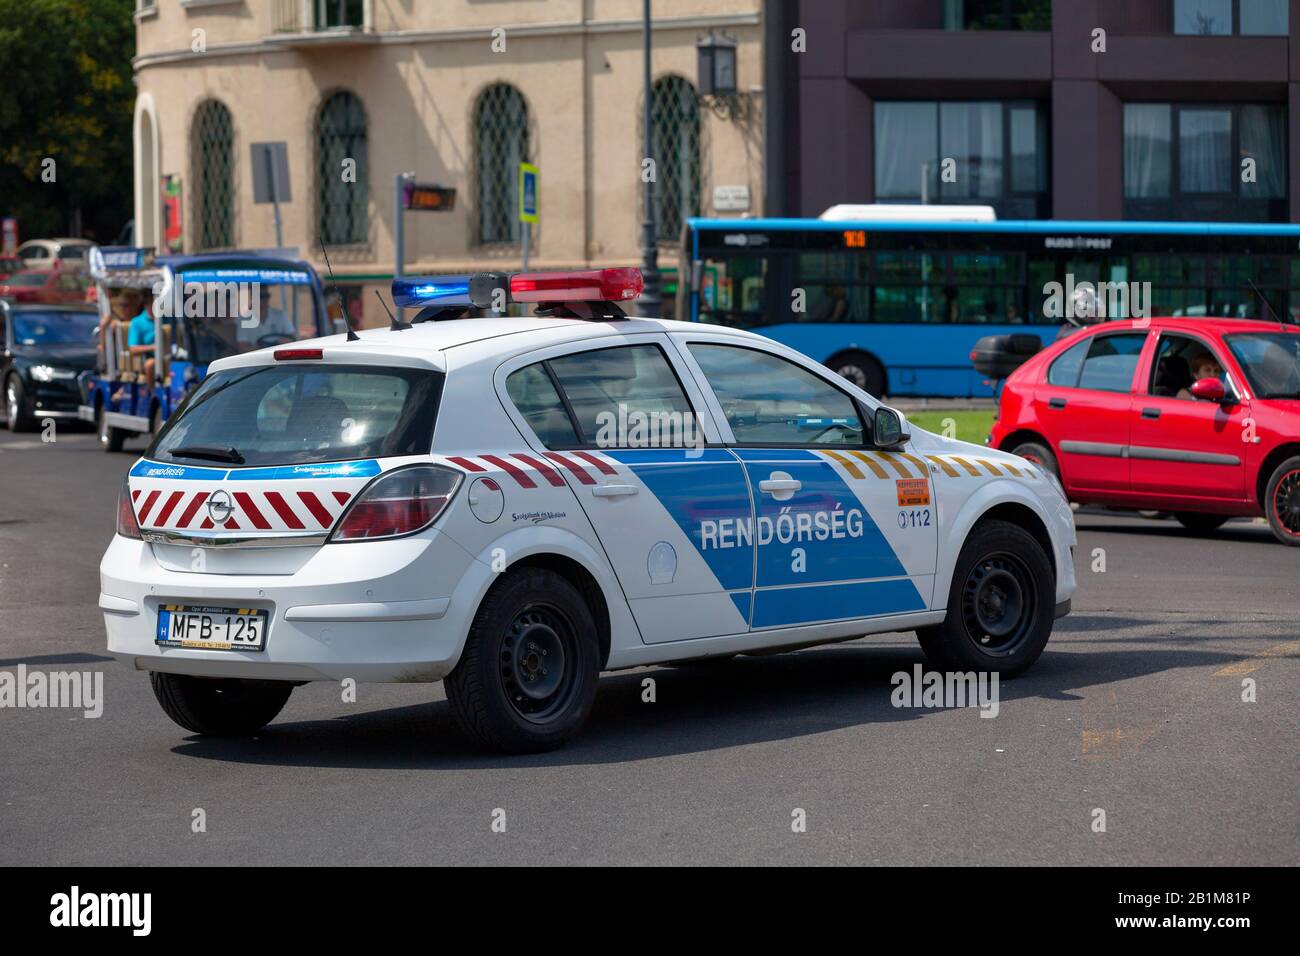 Budapest, Hungary - June 21 2018: Police car patrolling the street near Castle Hill. Stock Photo